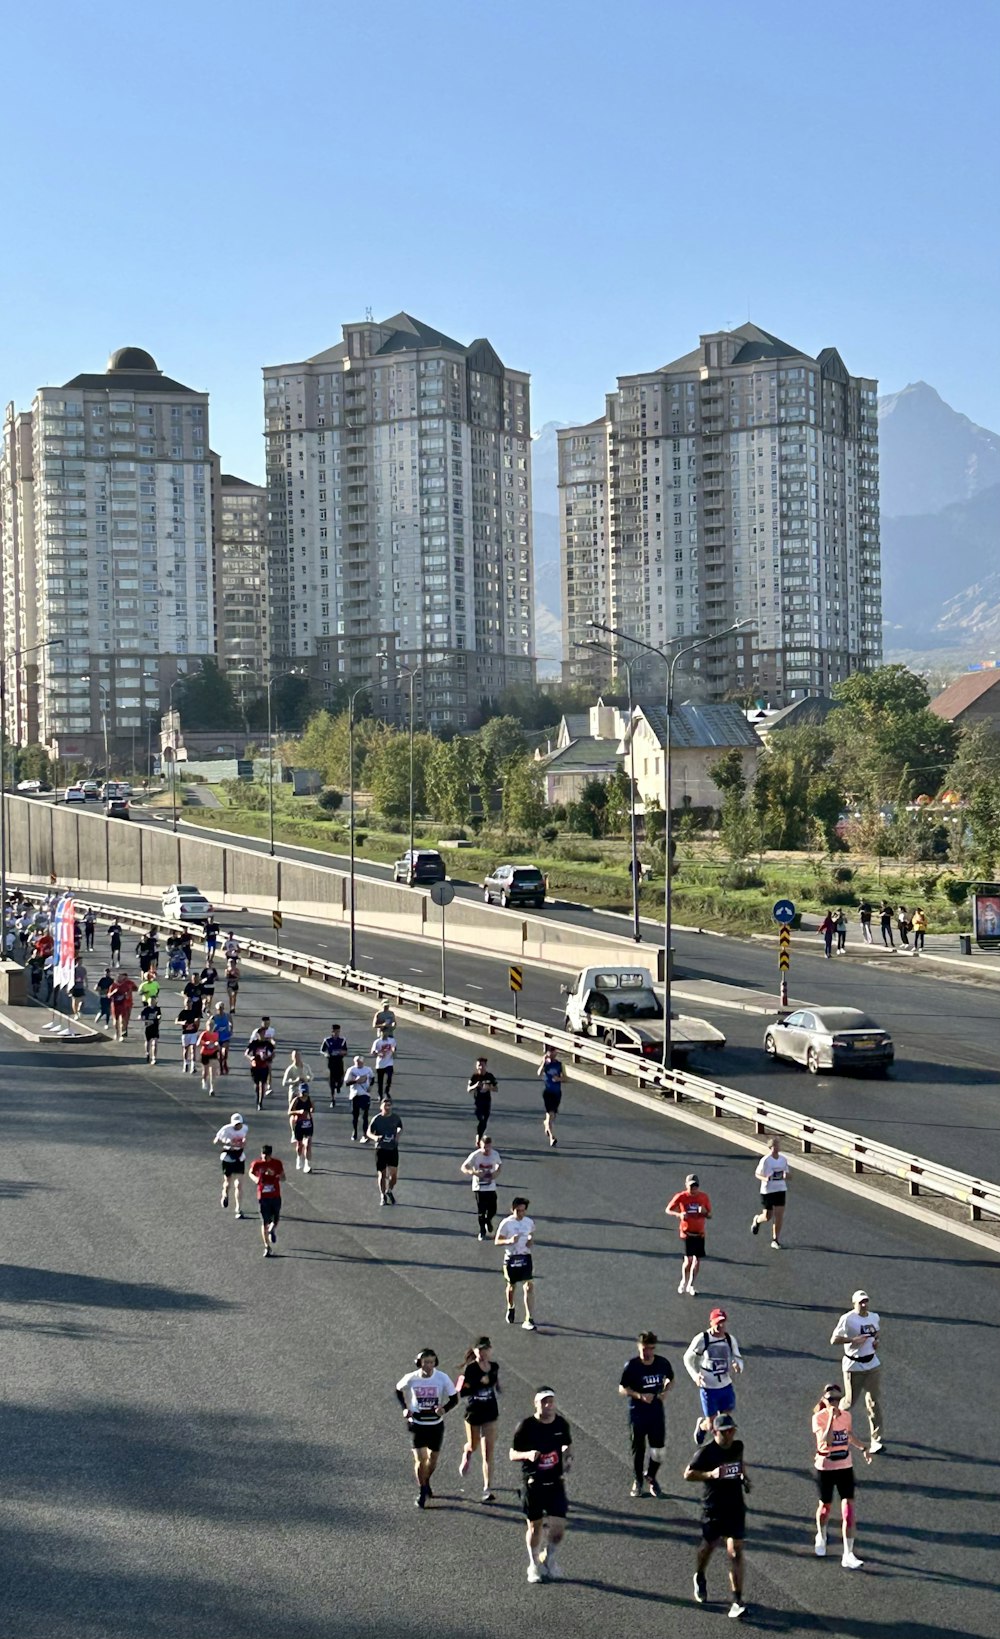 a group of people running on a street in front of tall buildings